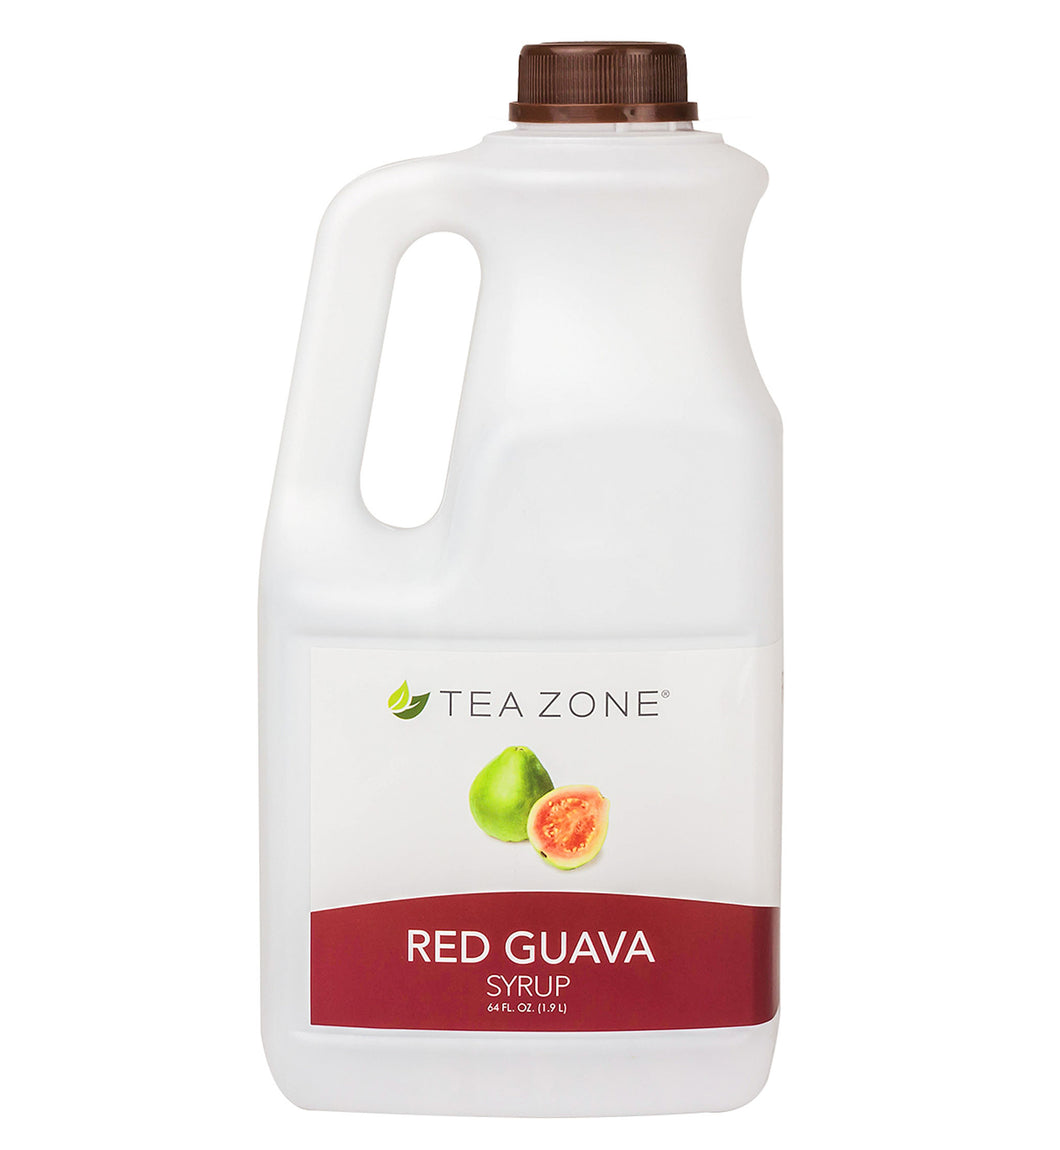 Tea Zone Red Guava Fruit Syrup 64 Oz.